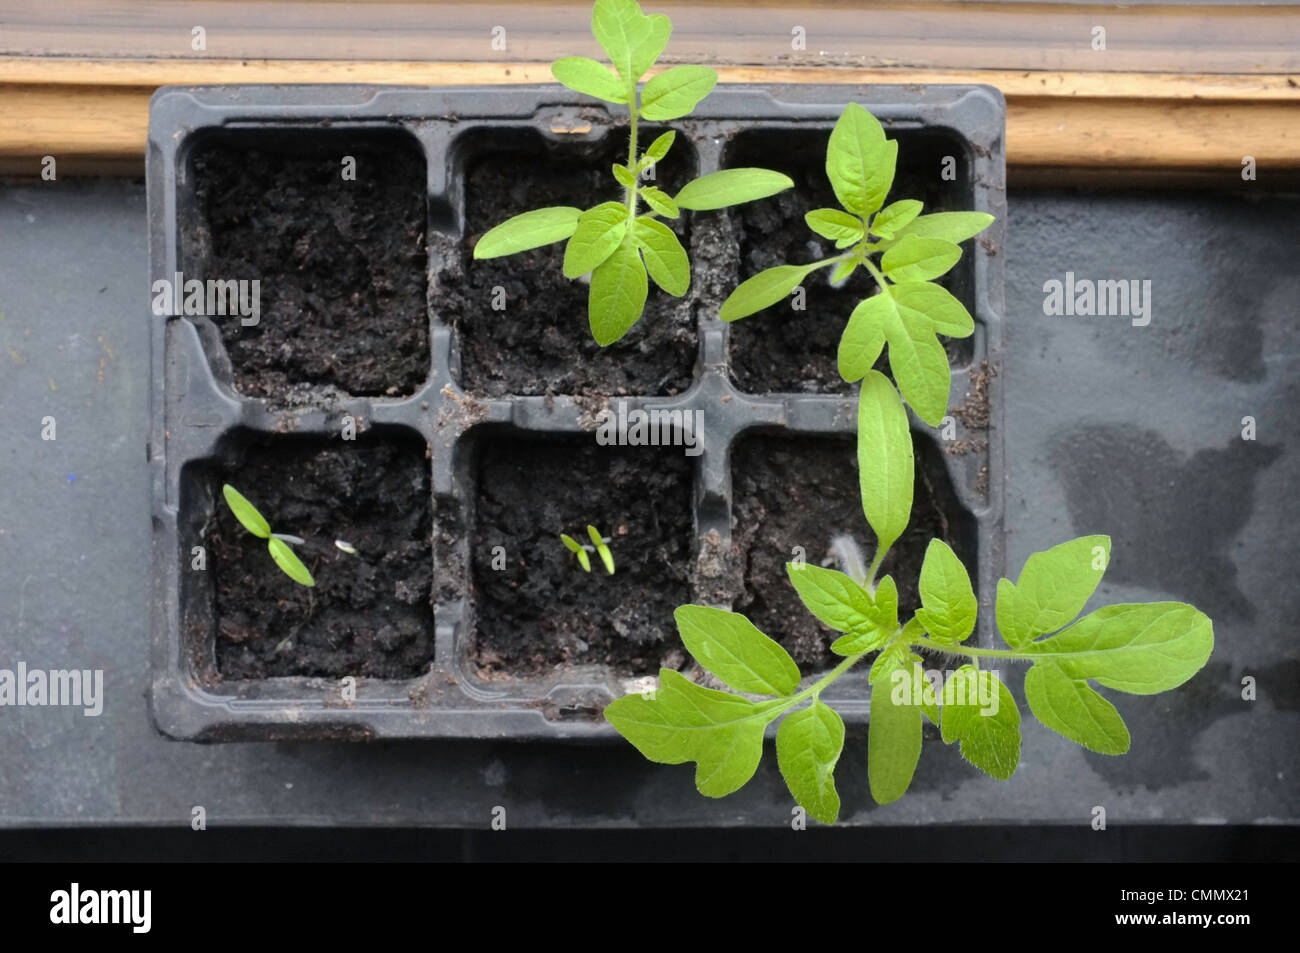 Young tomato plants and seedlings growing on a window sill Stock Photo